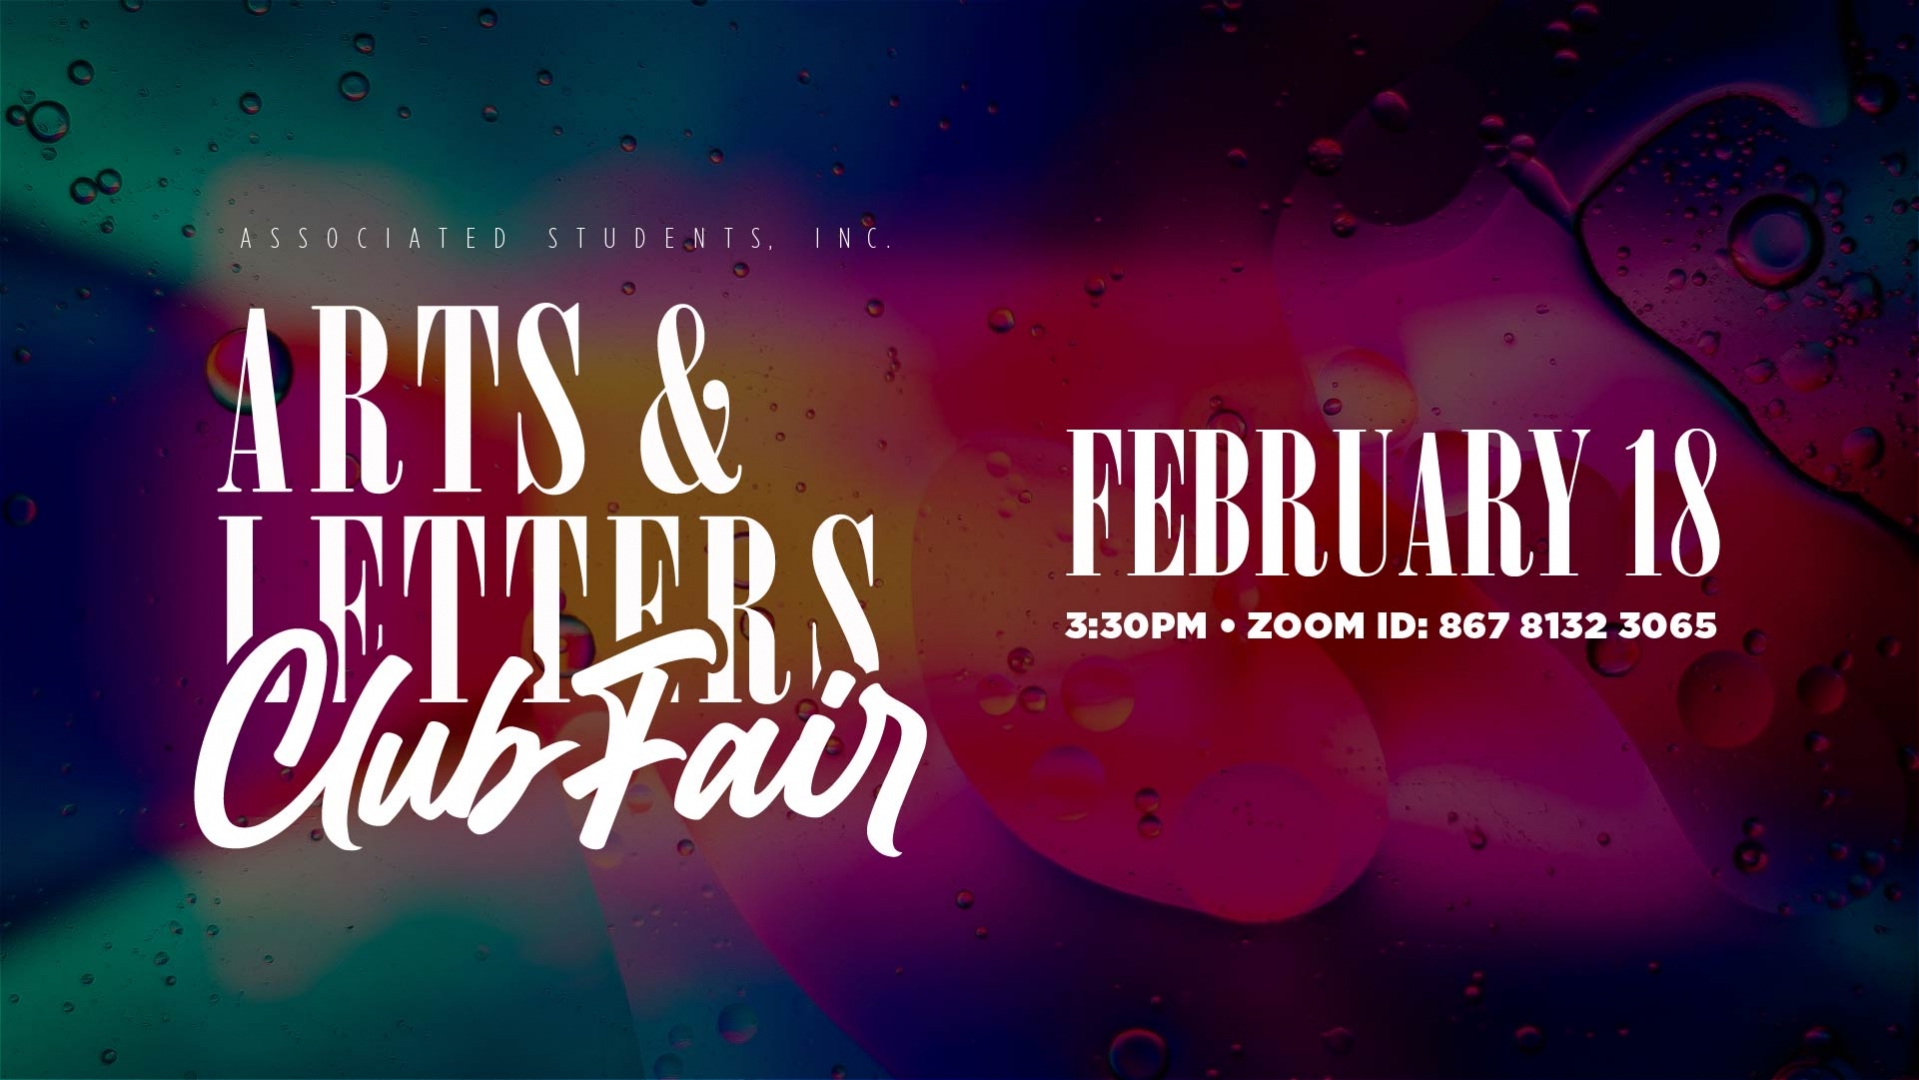 Arts and Letters Club Fair